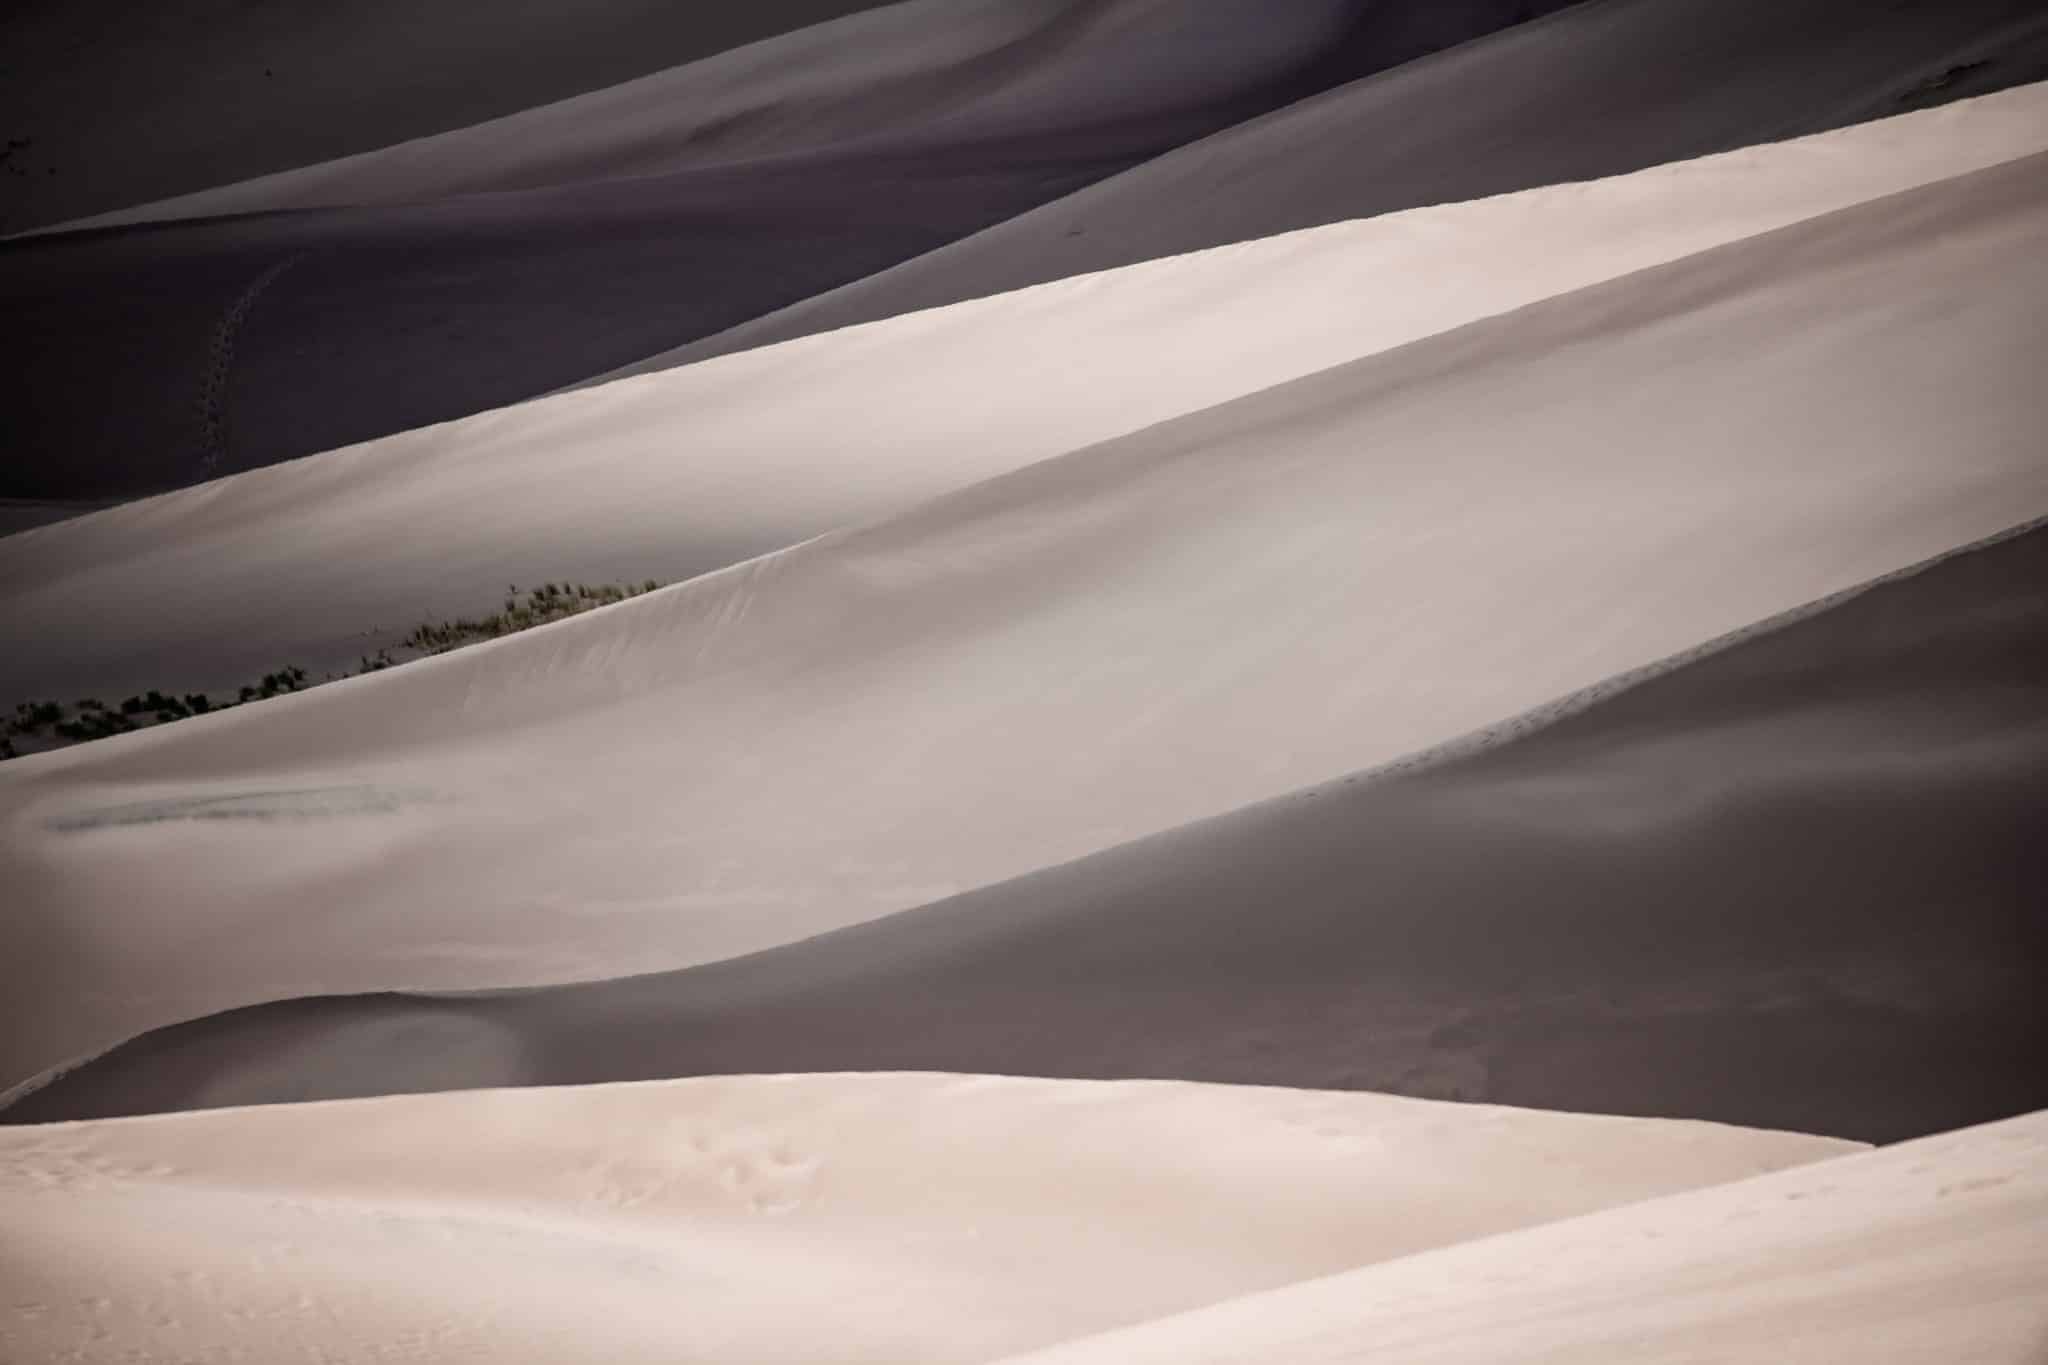 Partly cloudy skies cause interesting patterns of light and shadow on the sand dunes at Great Sand Dunes National Park and Preserve near Alamosa, Colorado.